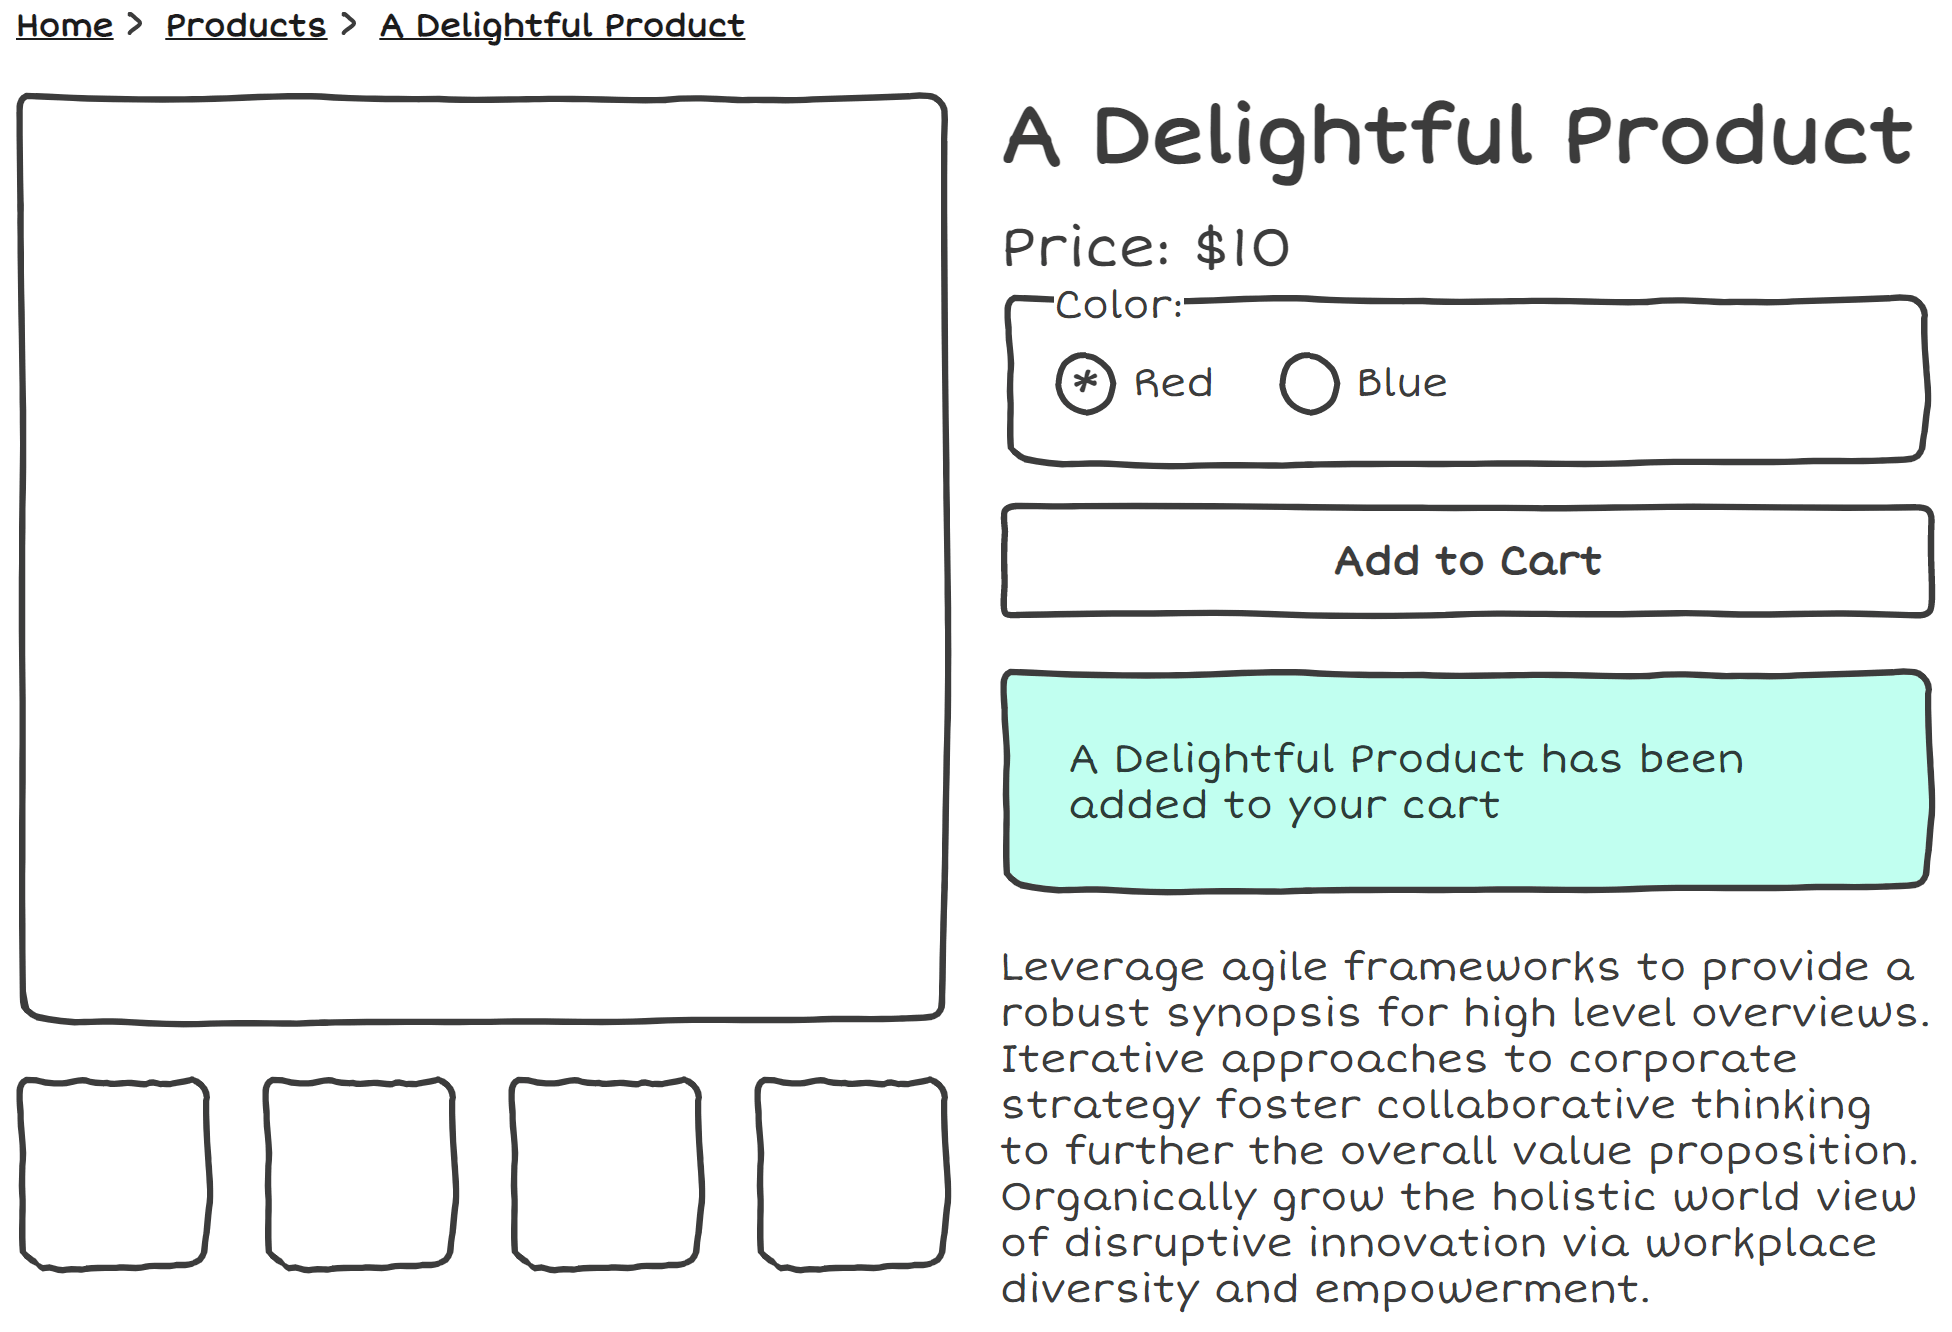 Product form with a notification that says 'A Delightful Product has been added to your cart' below the 'Add to Cart' button